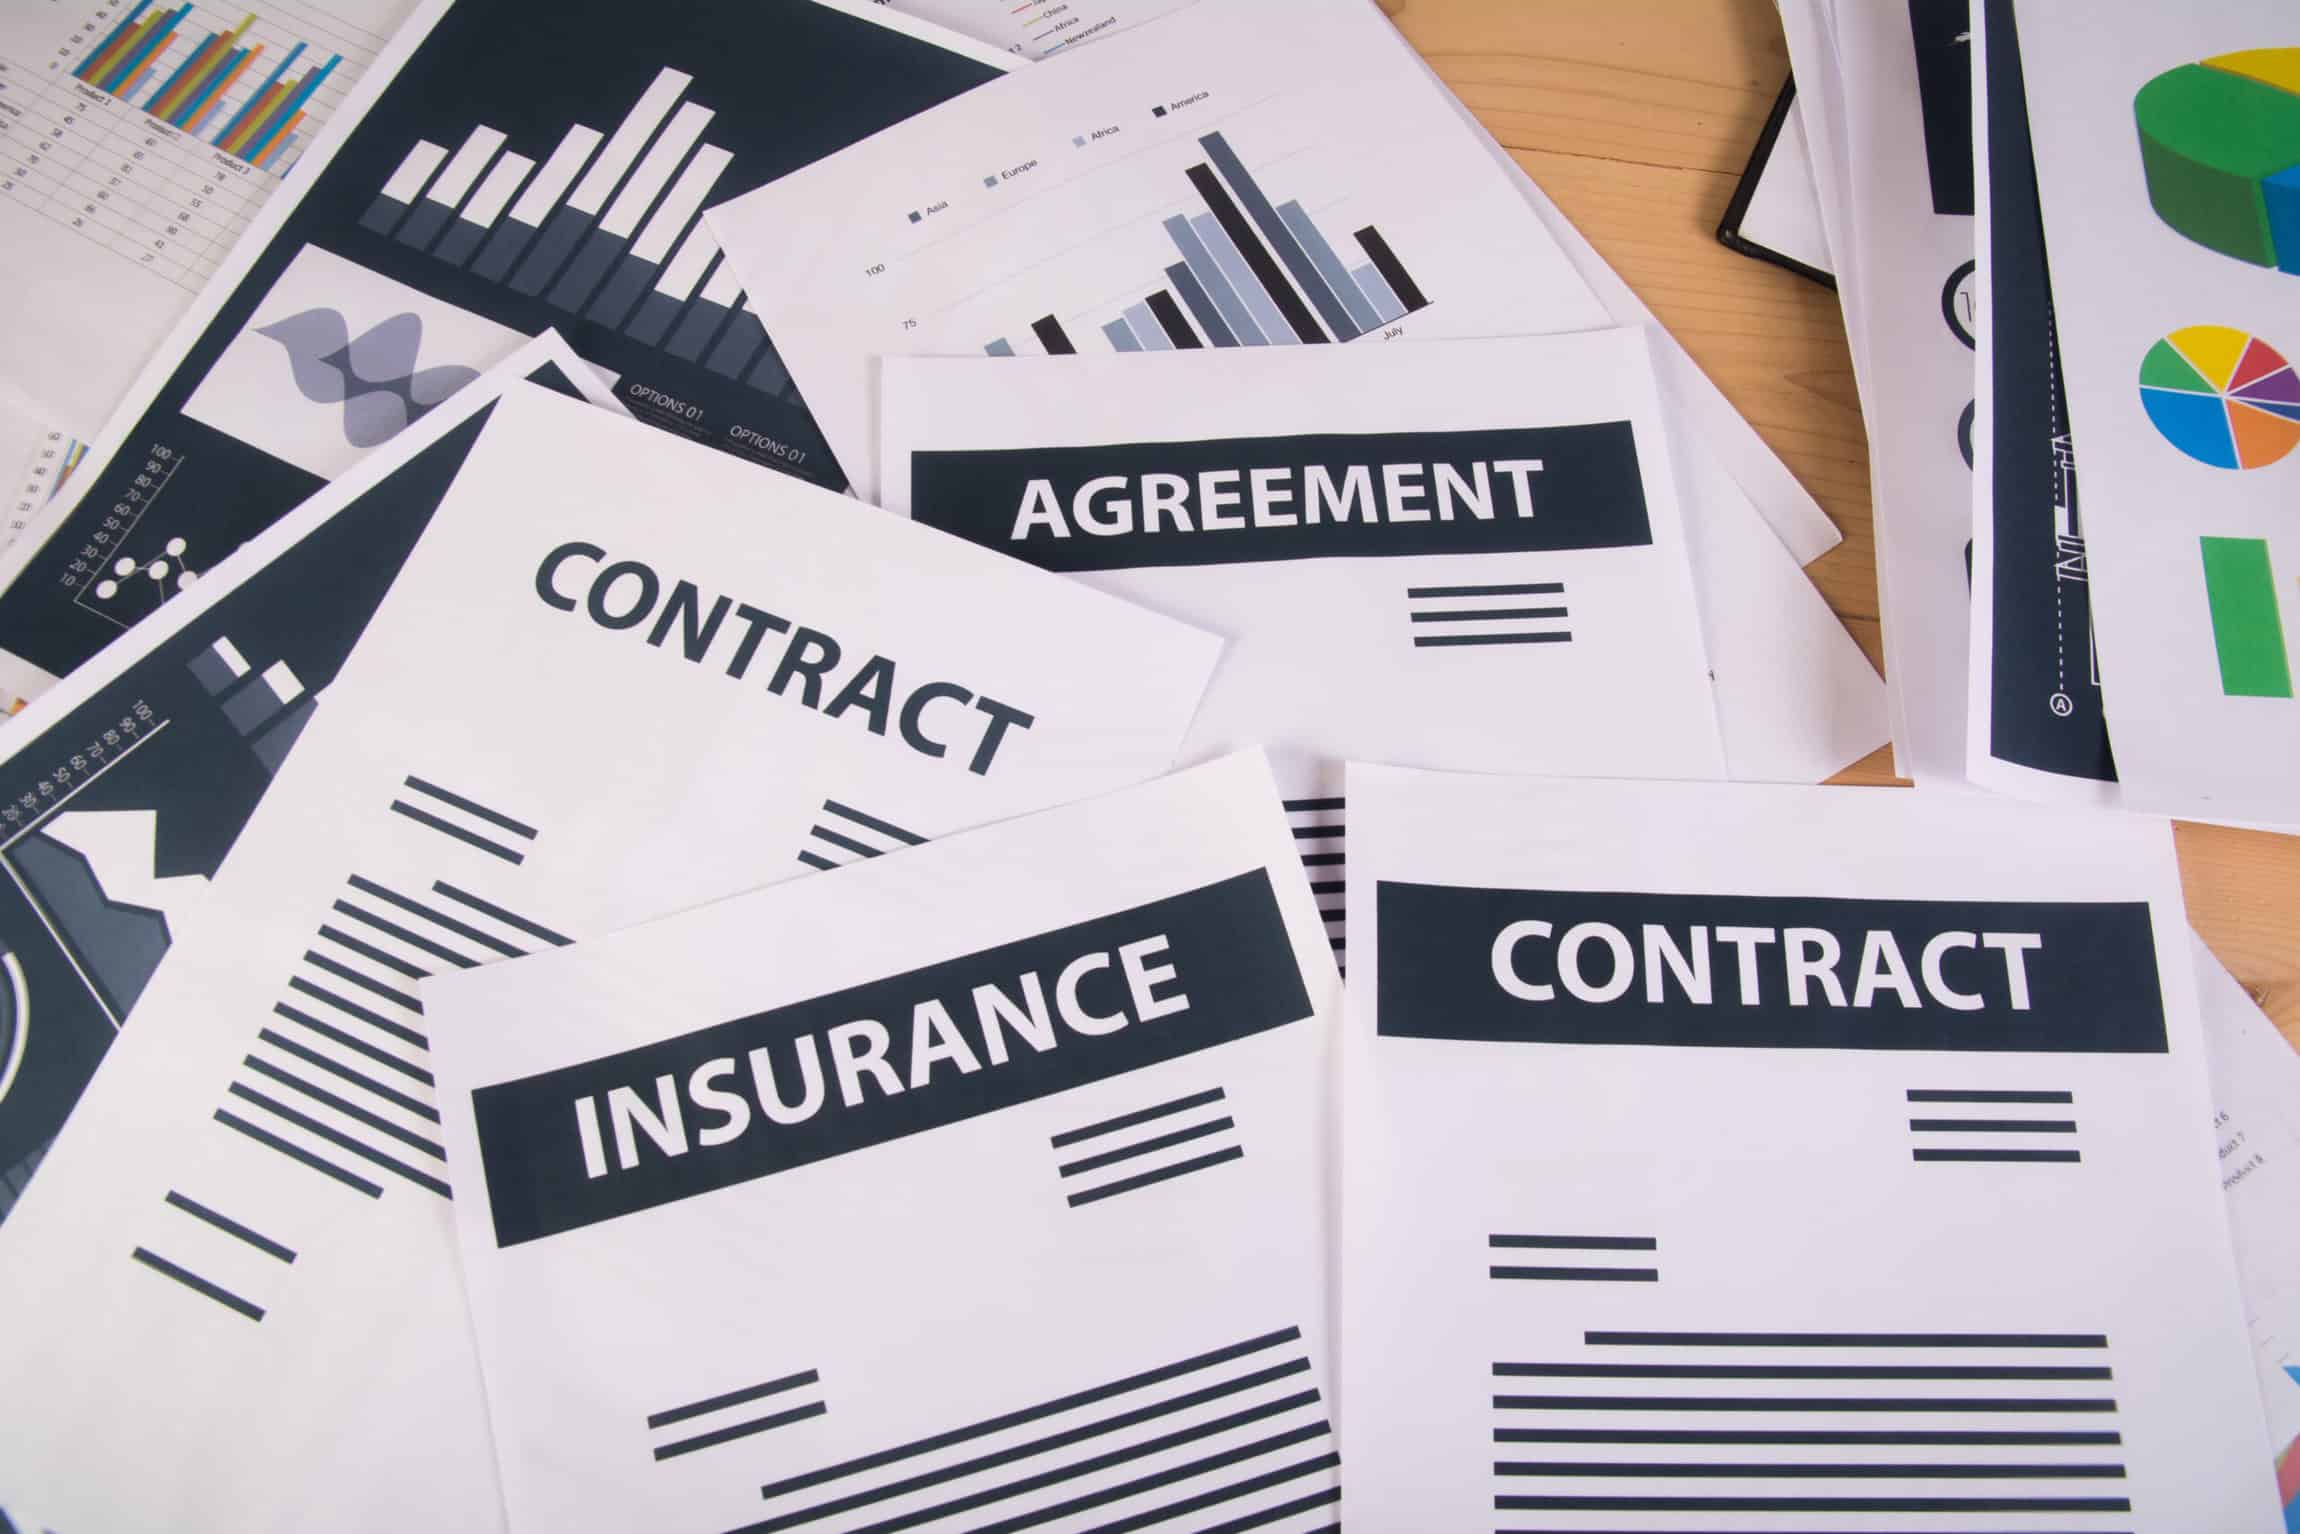 insurance contracts all over desk